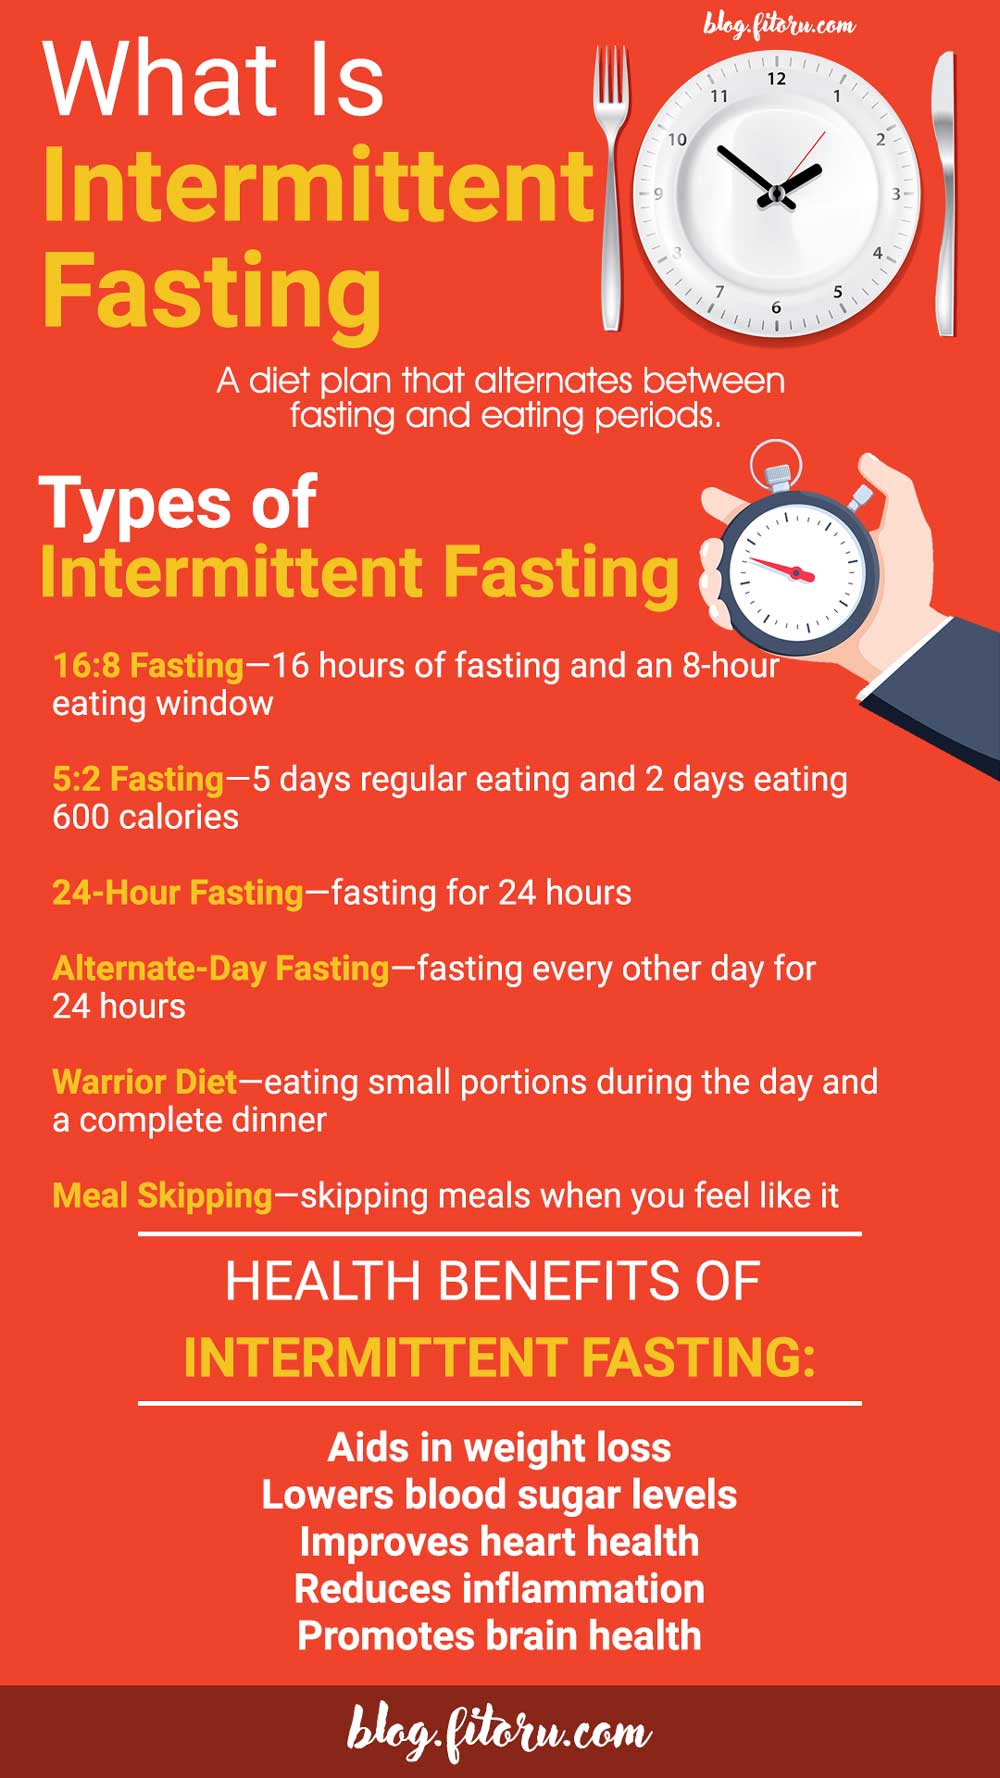 Types of Intermittent Fasting 